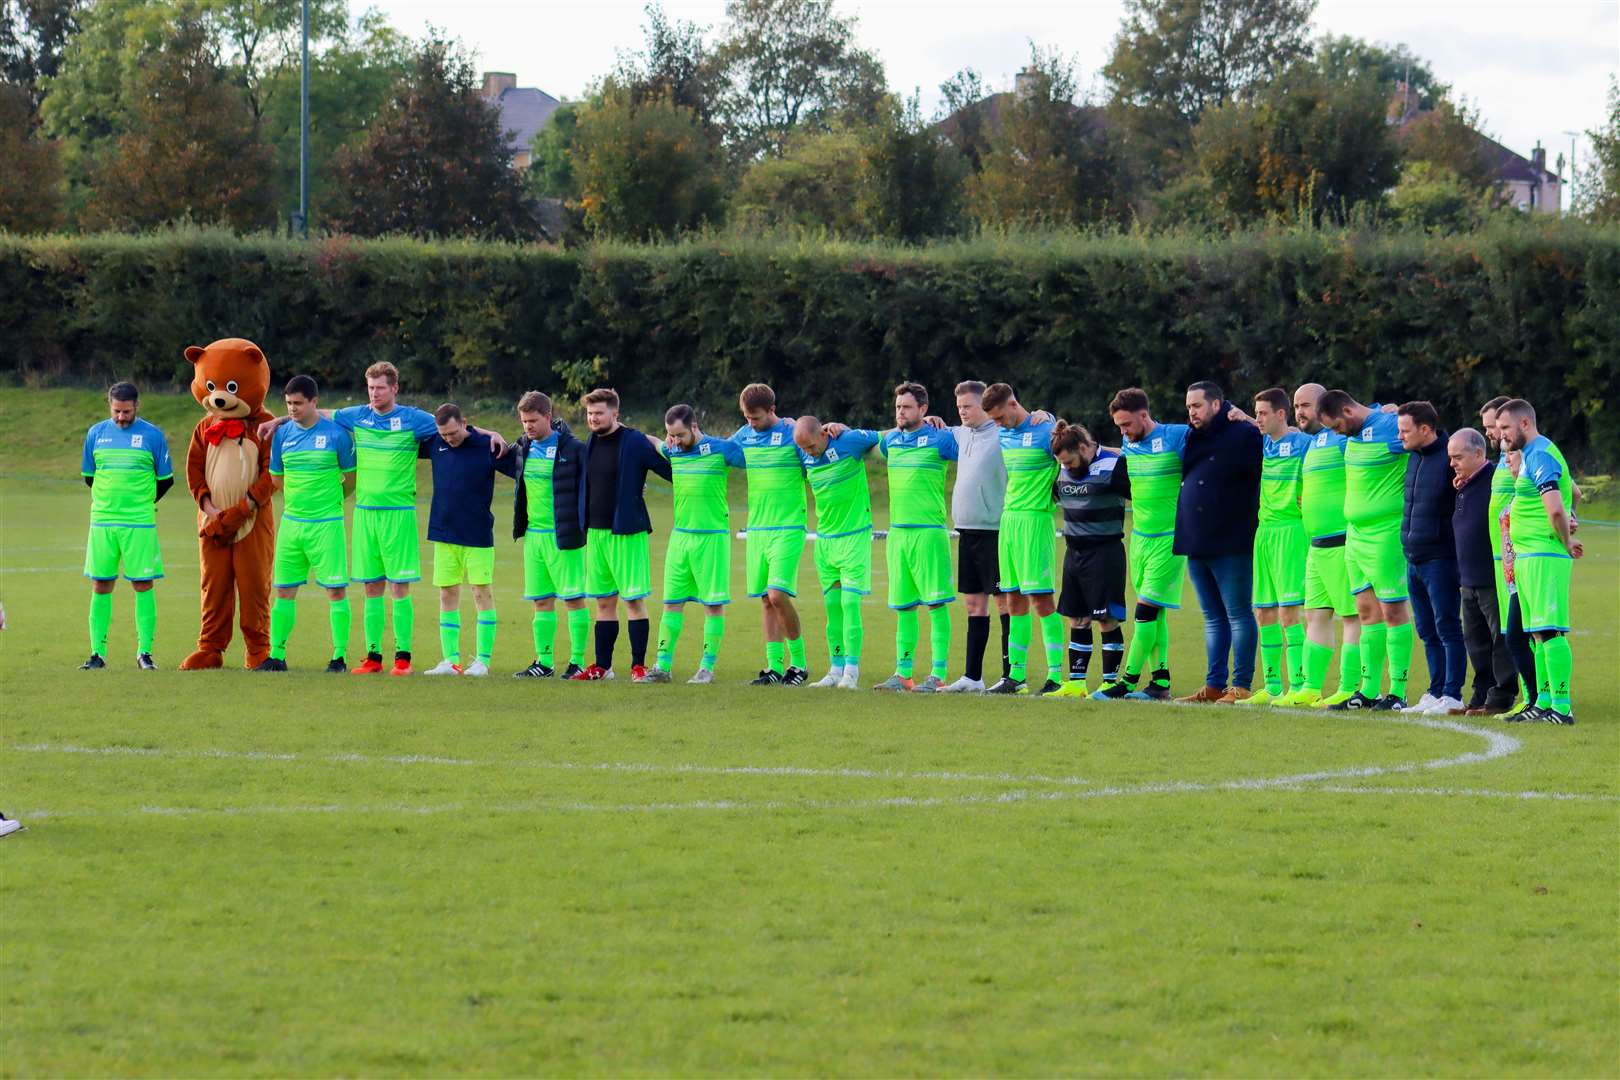 Shane and Ian Hoyle organised a charity football match raising £15,500 for the air ambulance in memory of their brother Andy and his son Joshua, who were killed in a car crash in Frant. Picture: Shane Hoyle